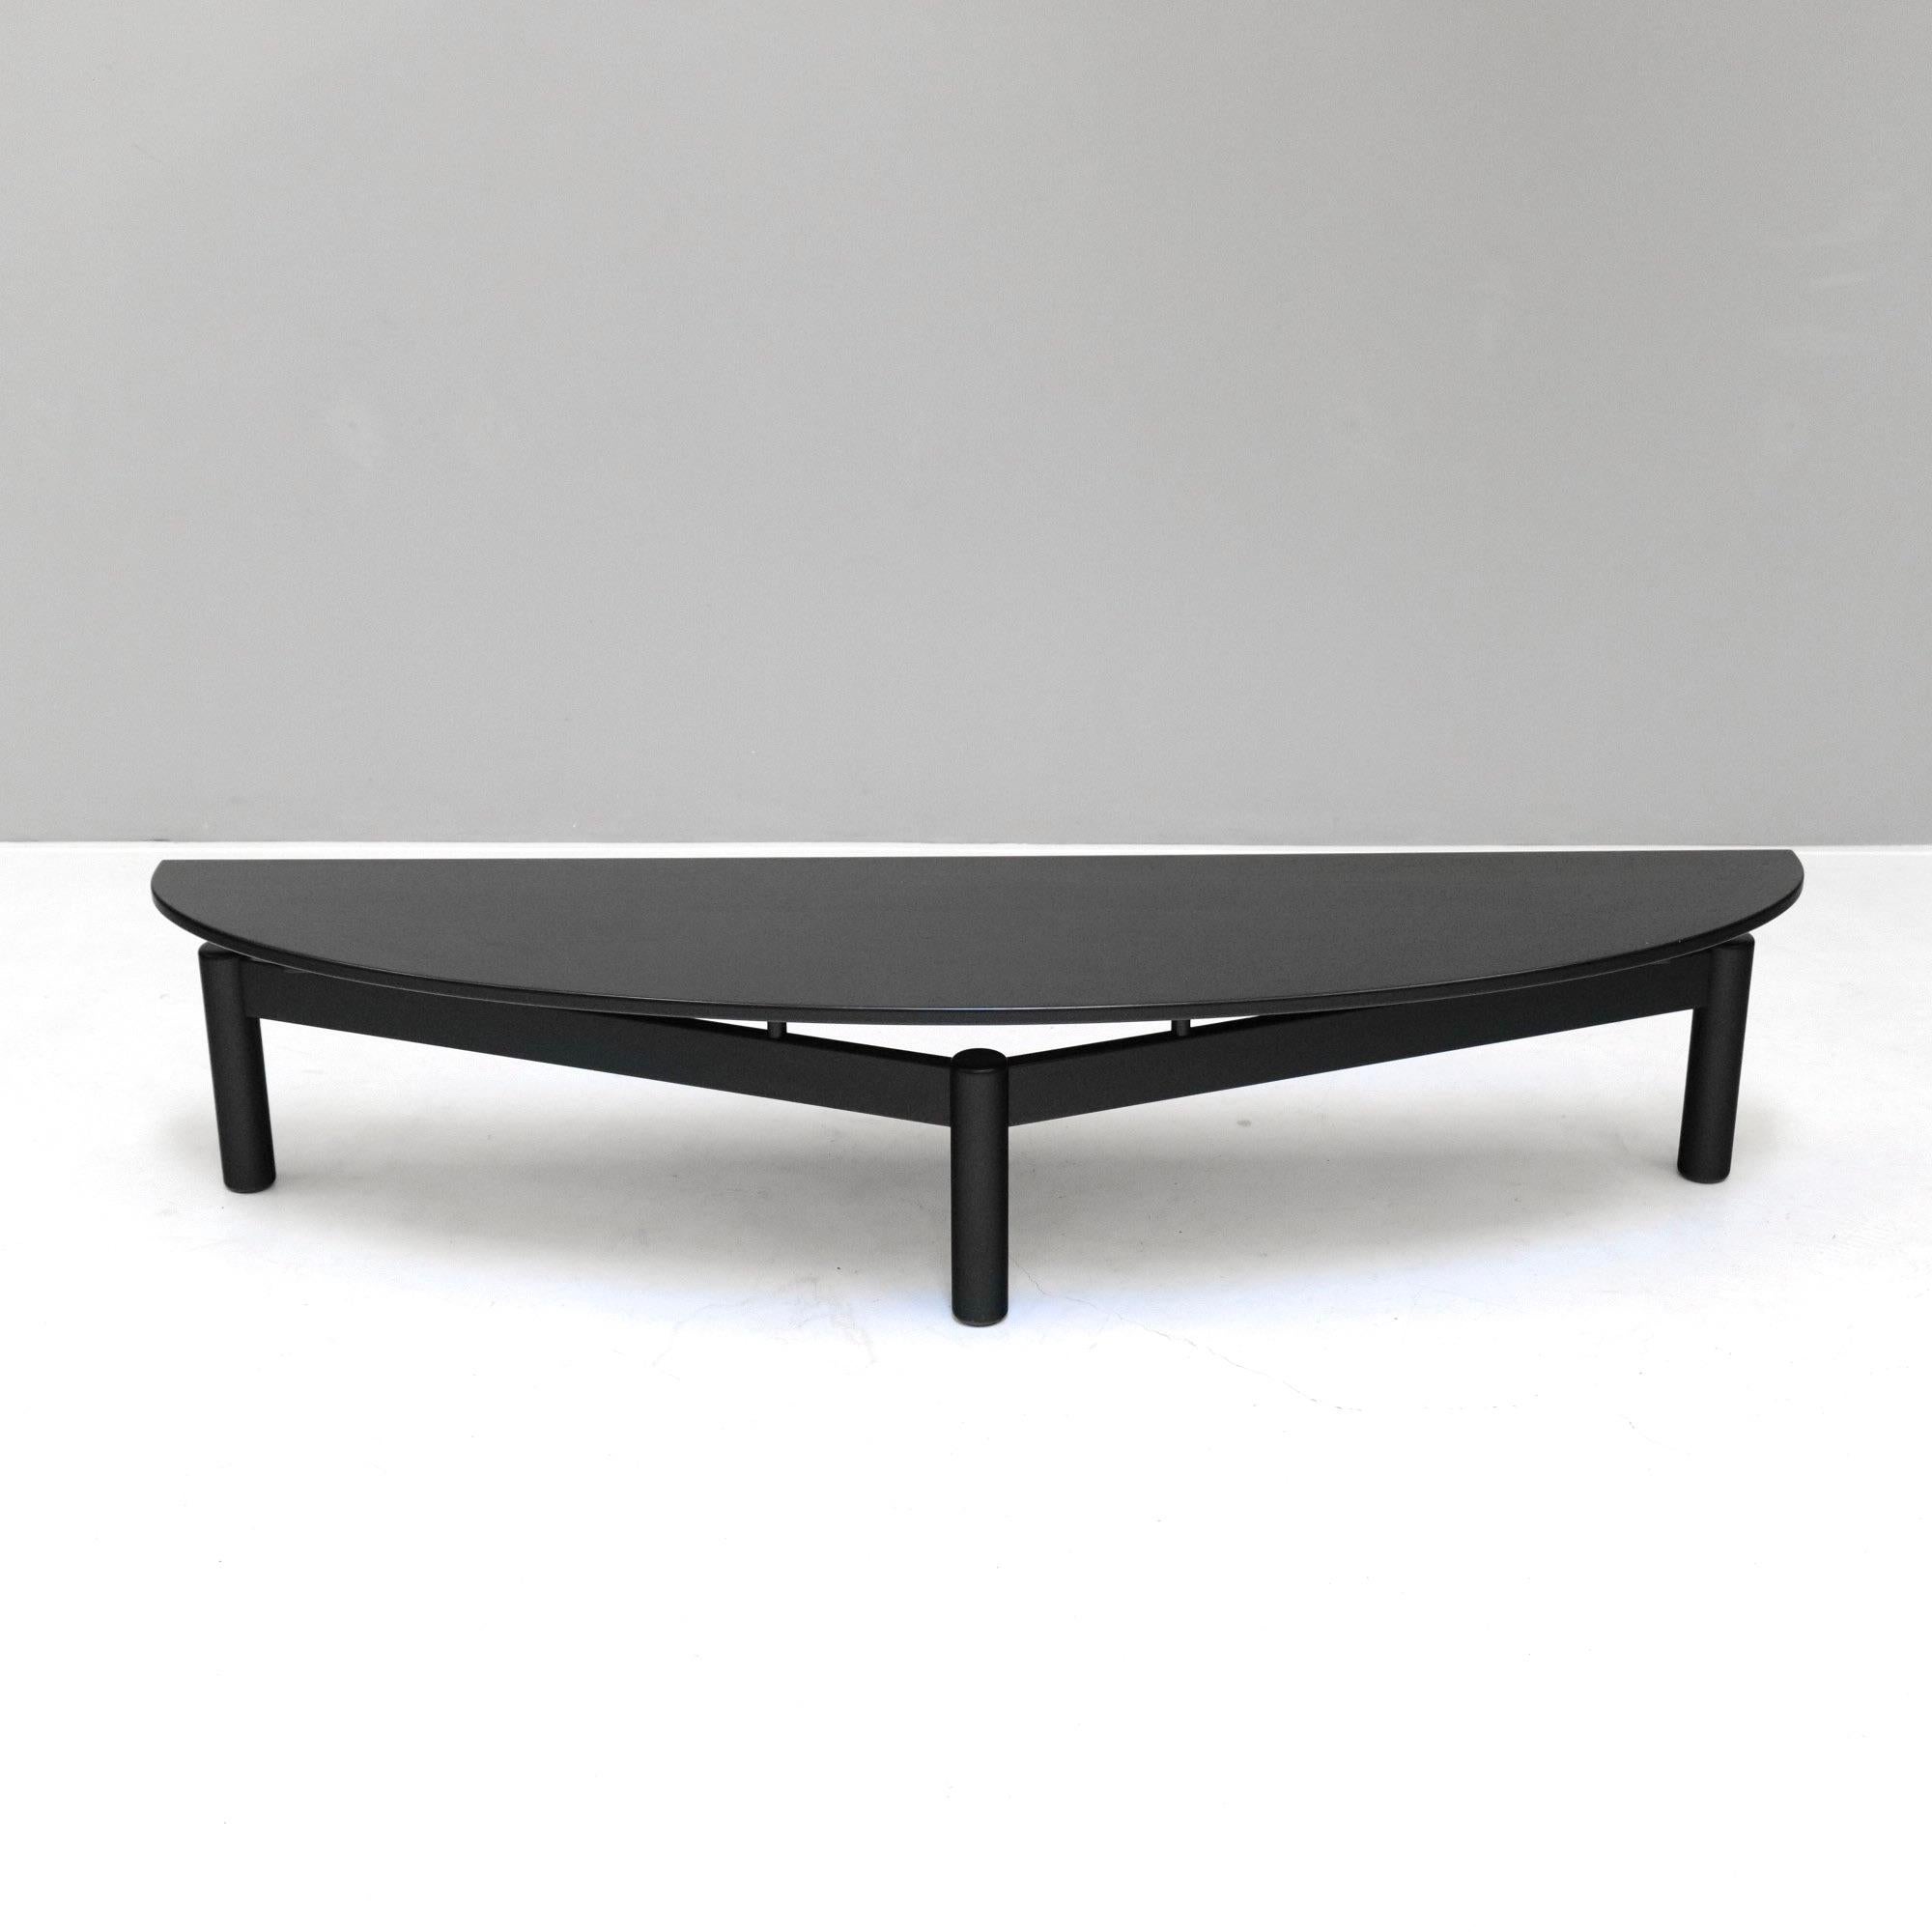 New table from deadstock. 

Cassina geometric coffee table in ebonised oak wood.

The coffee table is also suitable as a low console on the wall. Originally designed by Vico Magistretti for the sofa Sinbad.